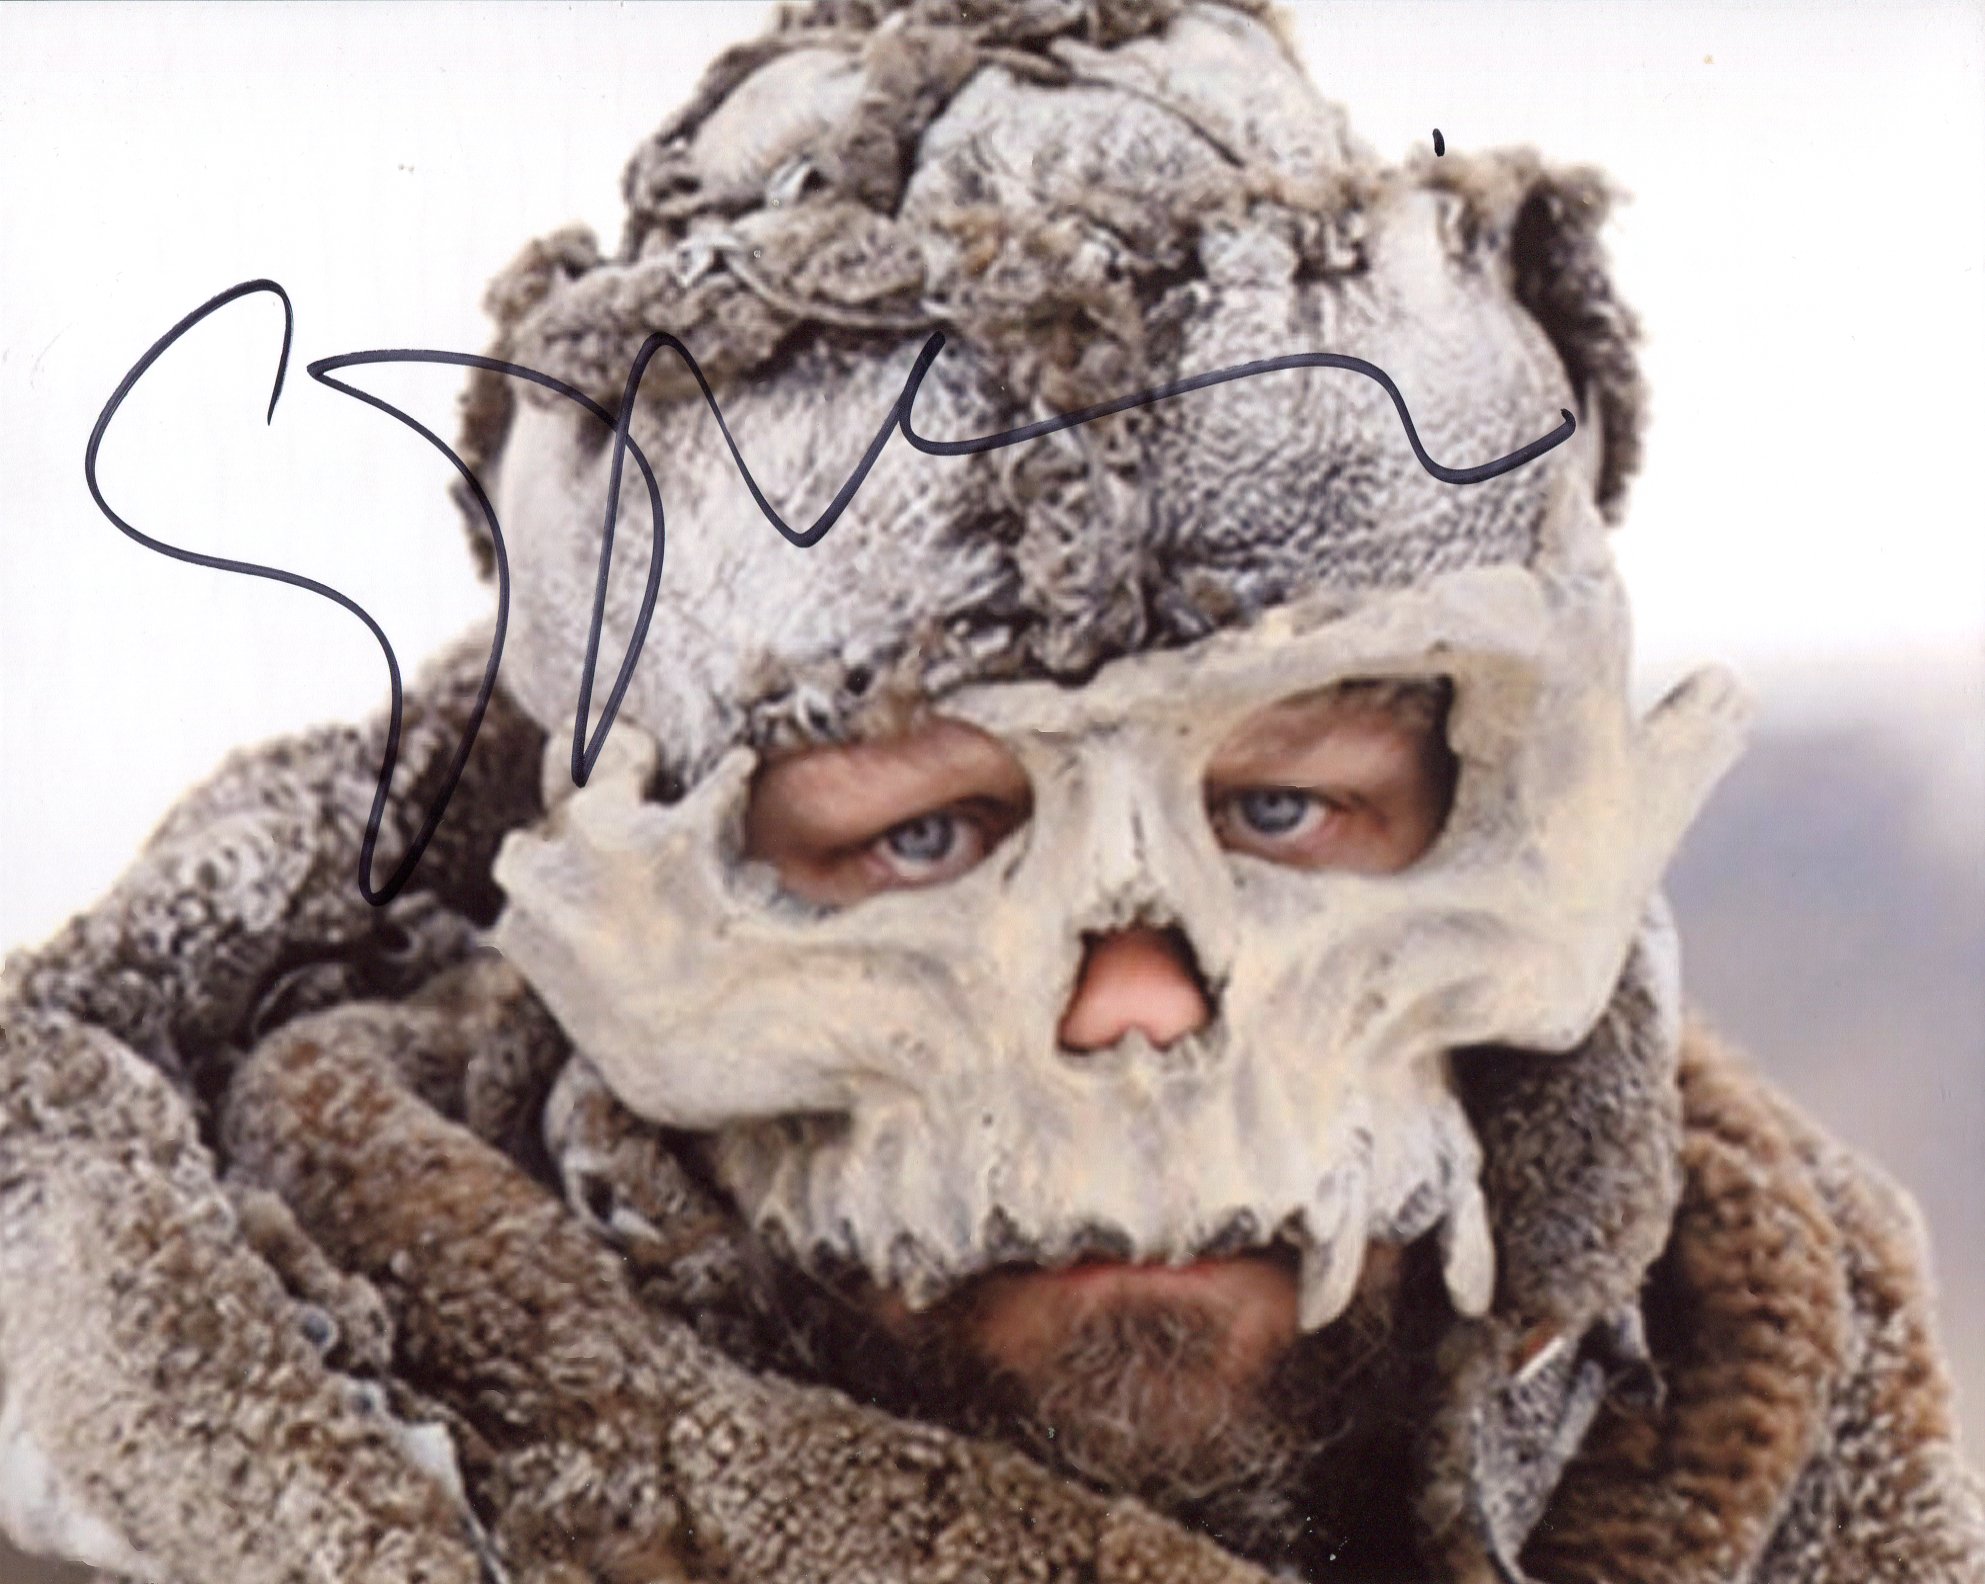 Game of Thrones 8x10 photo signed by actor Edward Dogliani as The Lord of Bones. Good condition. All